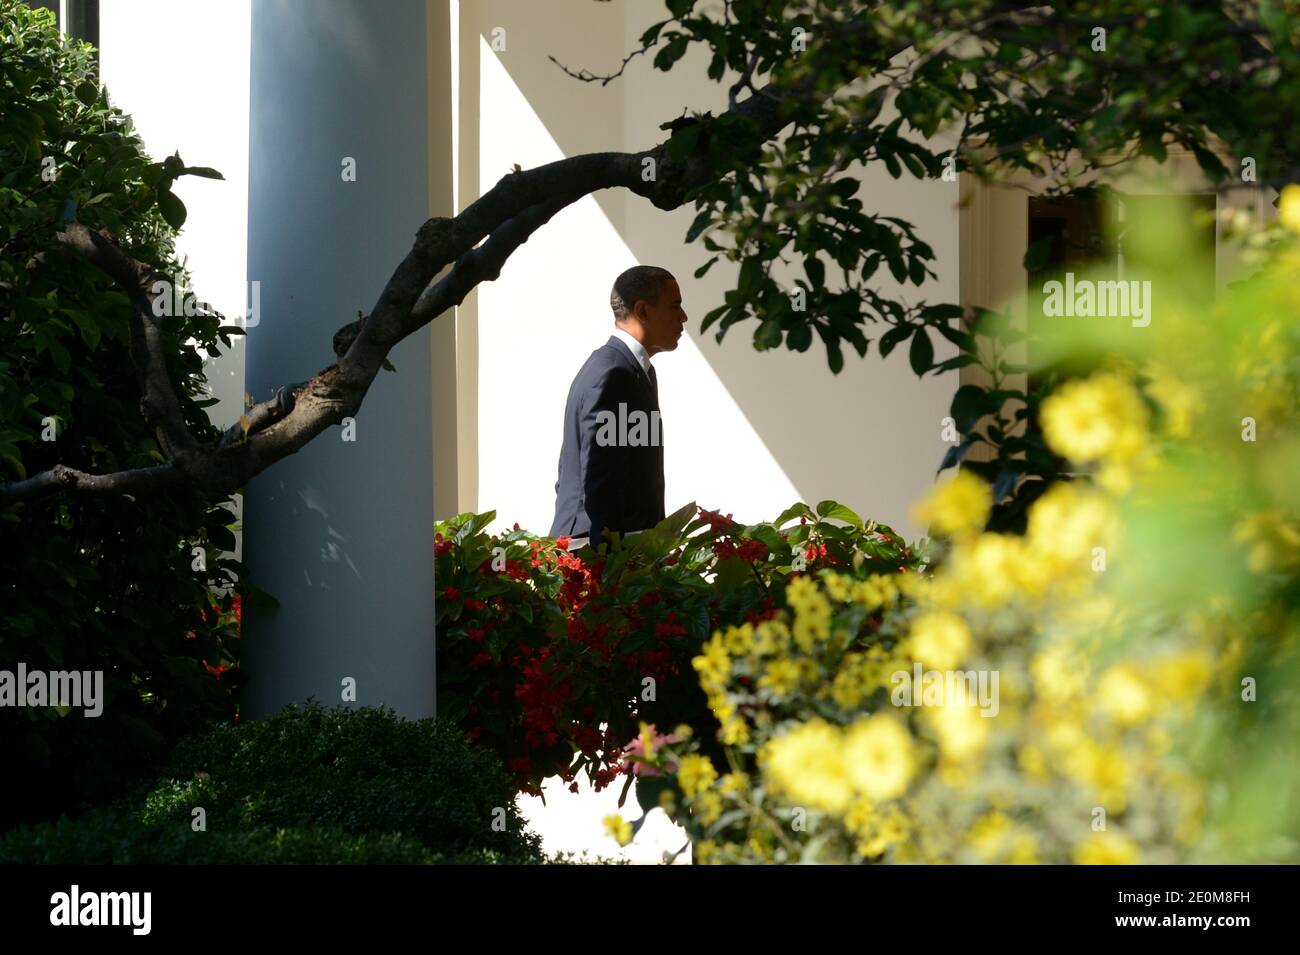 US President Barack Obama walks to the Oval Office after returning from a visit to the State Department, at the White House in Washington DC, USA on September 12, 2012. Gunmen attacked the US consulate in Benghazi, killing US ambassador to Libya, Christopher Stevens, late 11 September 2012, while another assault took place on the US embassy in Cairo. Photo by Michael Reynolds/Pool/ABACAPRESS.COM Stock Photo